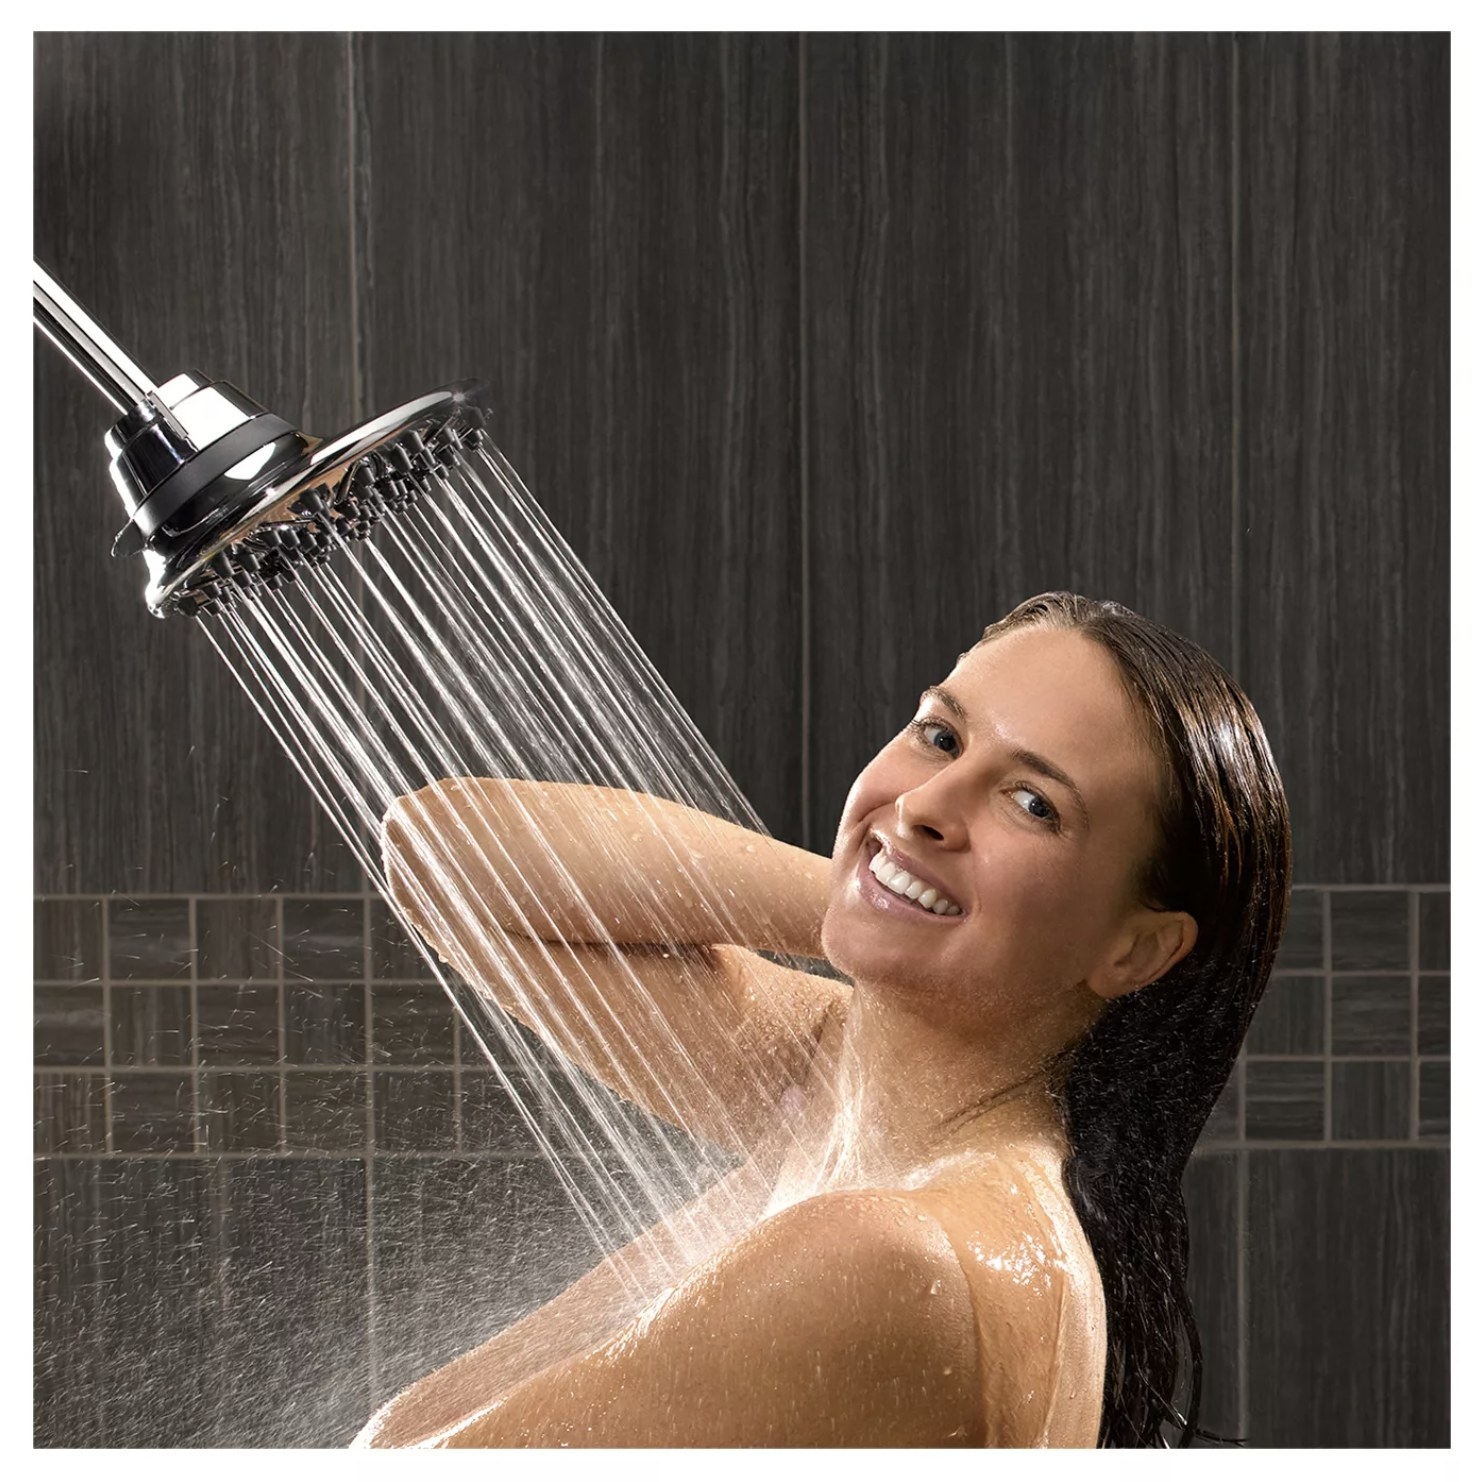 A model under the showerhead spraying water